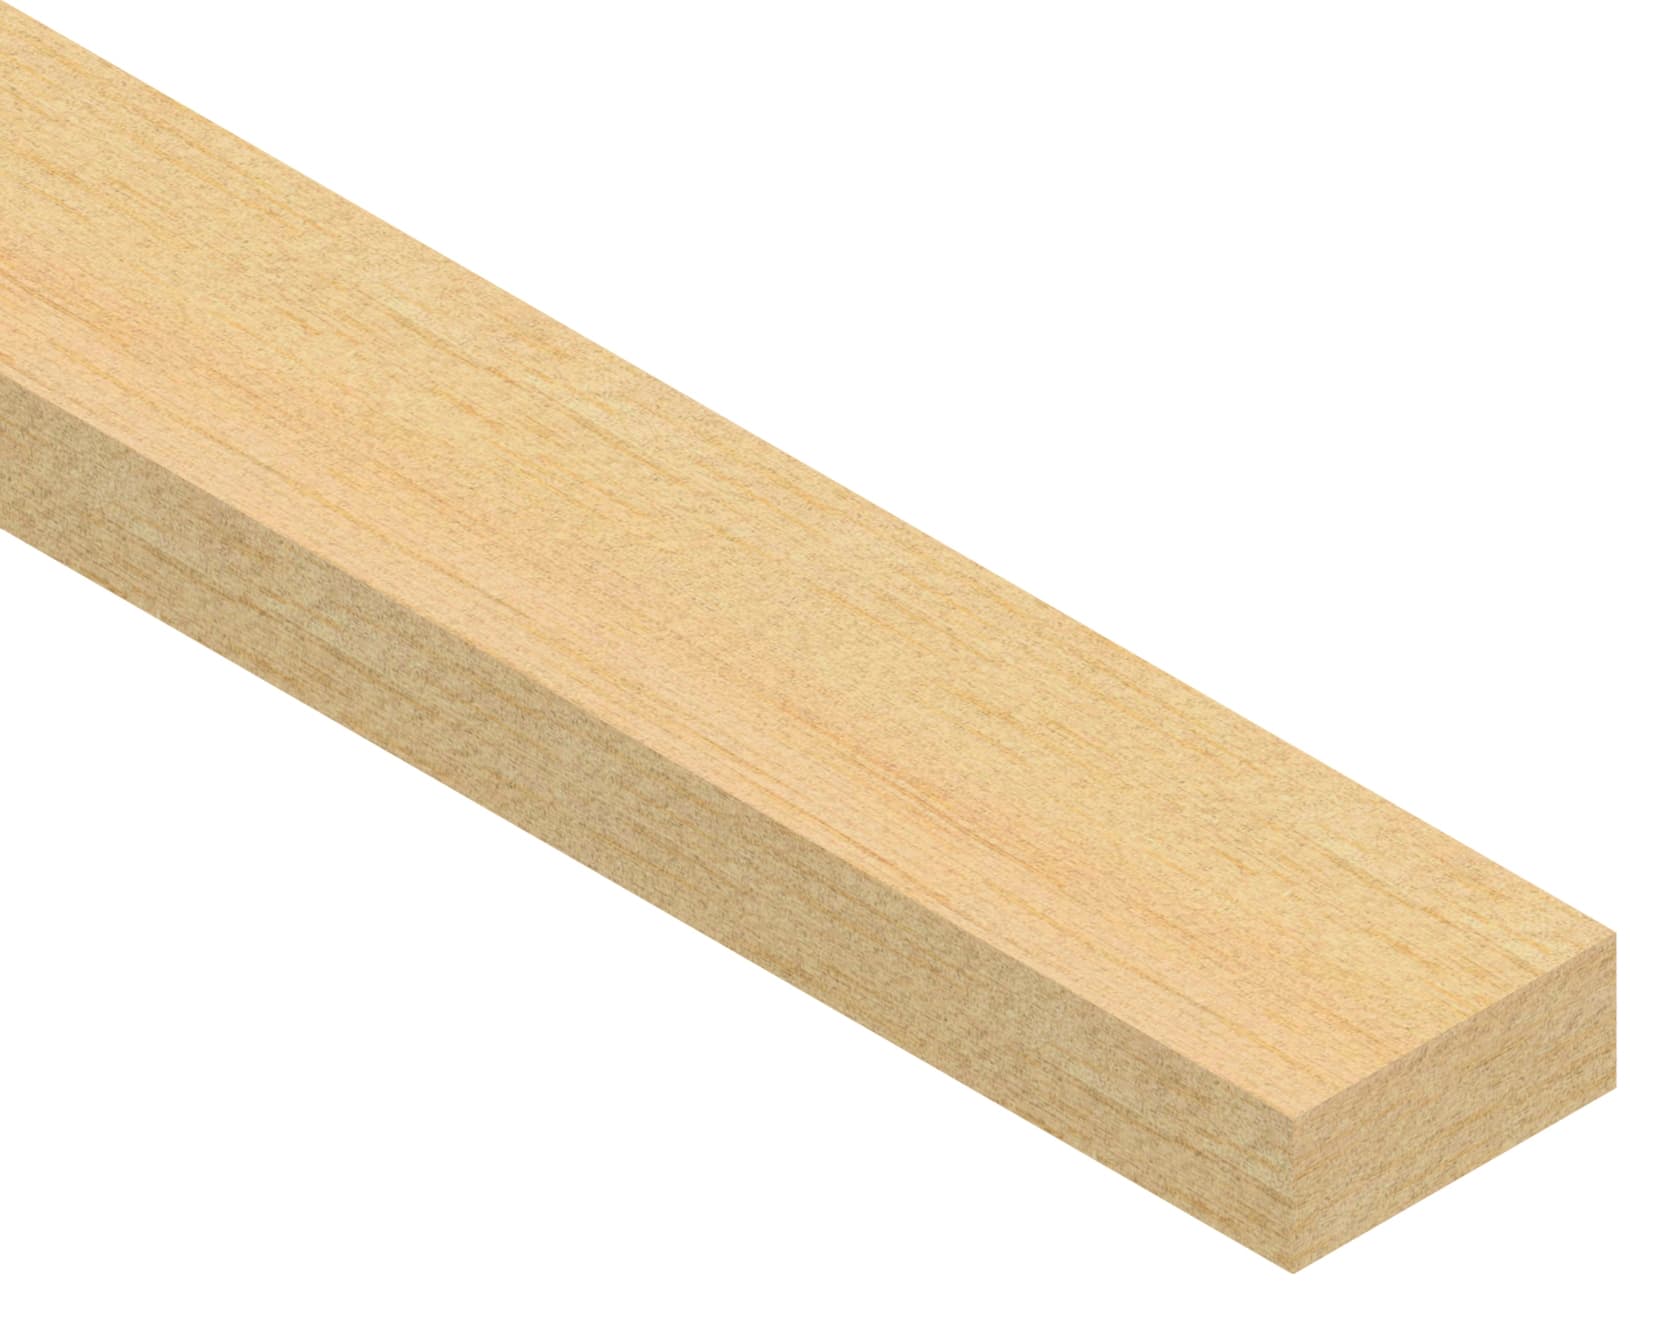 Cheshire Mouldings Pine Stripwood - 15 x 36